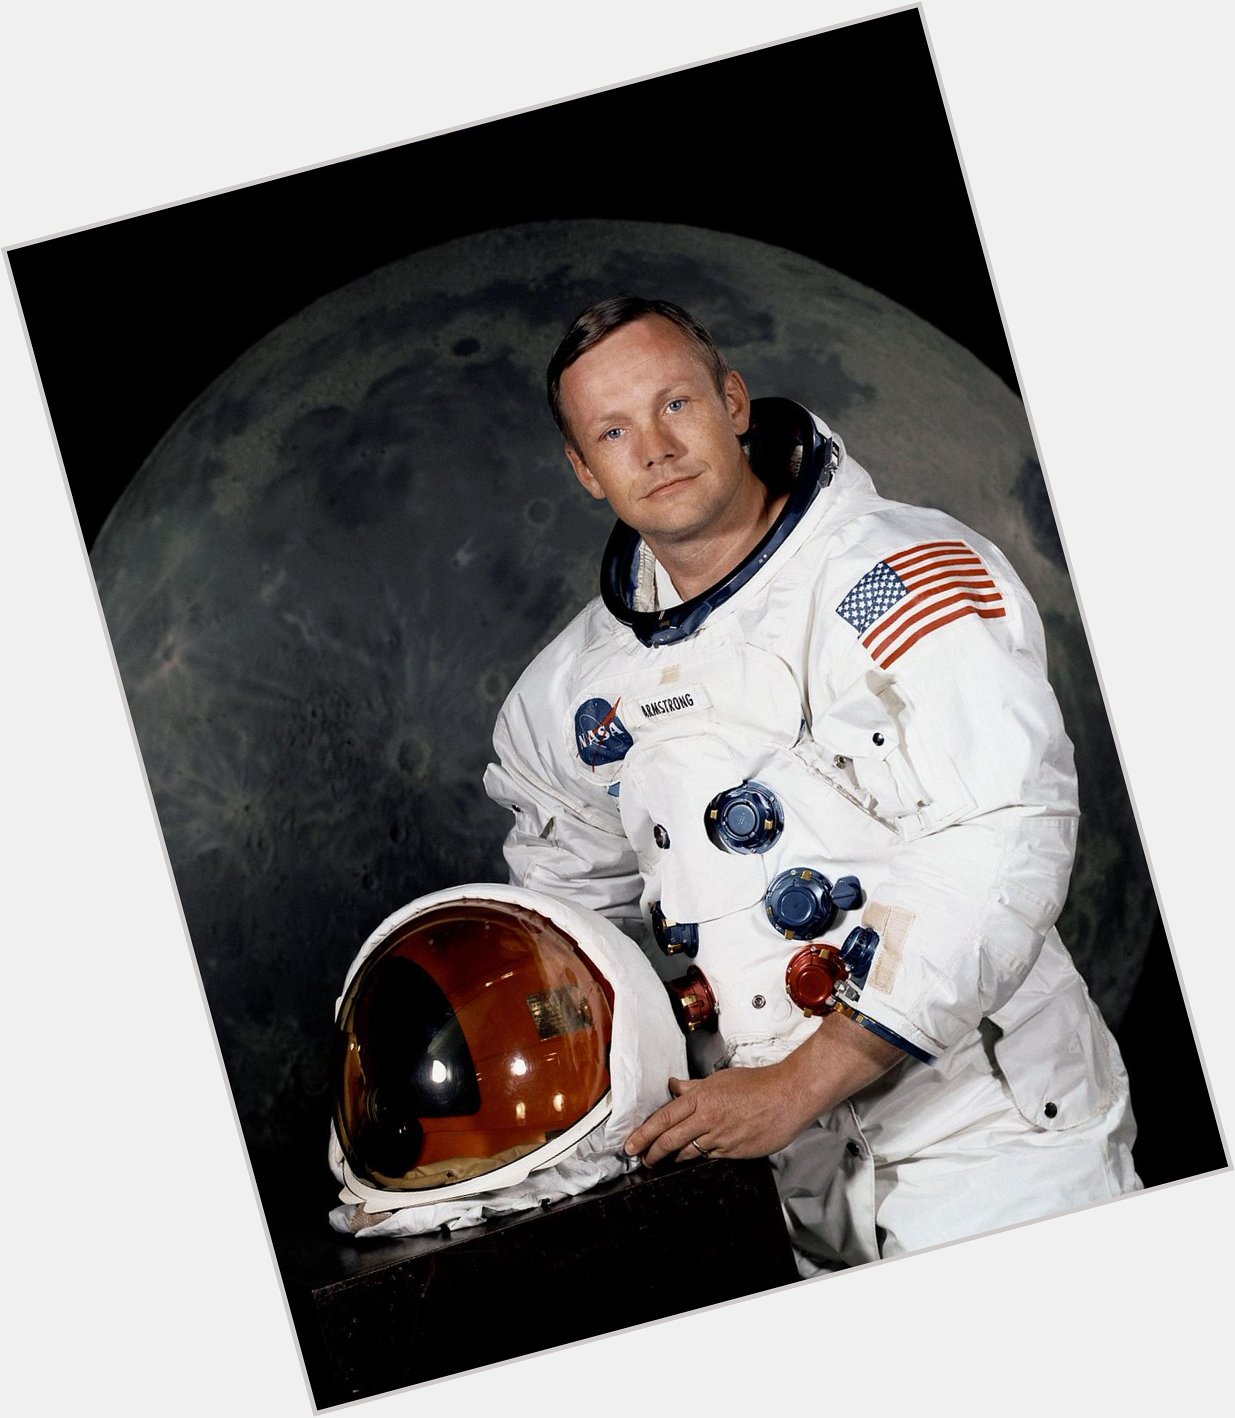 Happy Birthday to Neil Armstrong, who would have turned 87 today! 